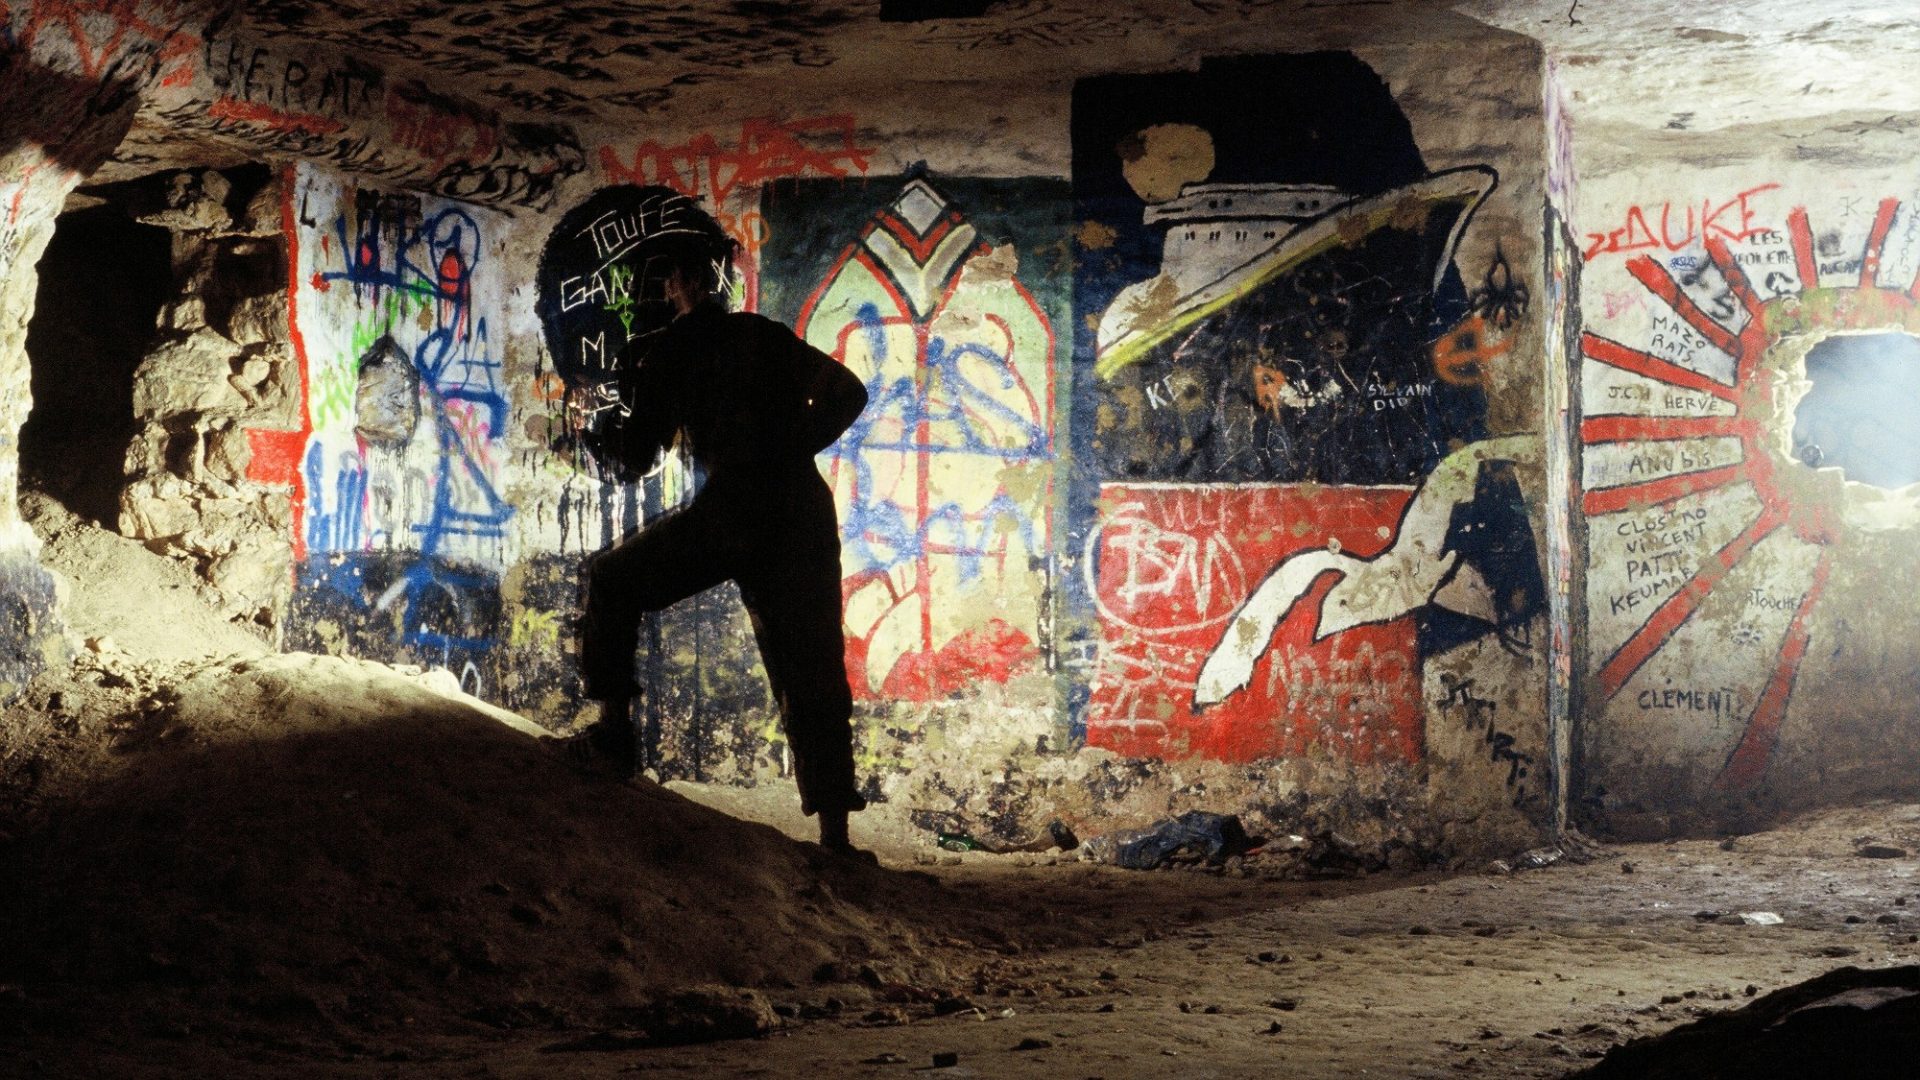 The catacombs form a 200km network underneath Paris. Graffiti is one motive for the ‘cataphiles’. Photo: Olivier Faÿ/Sygma/Getty
